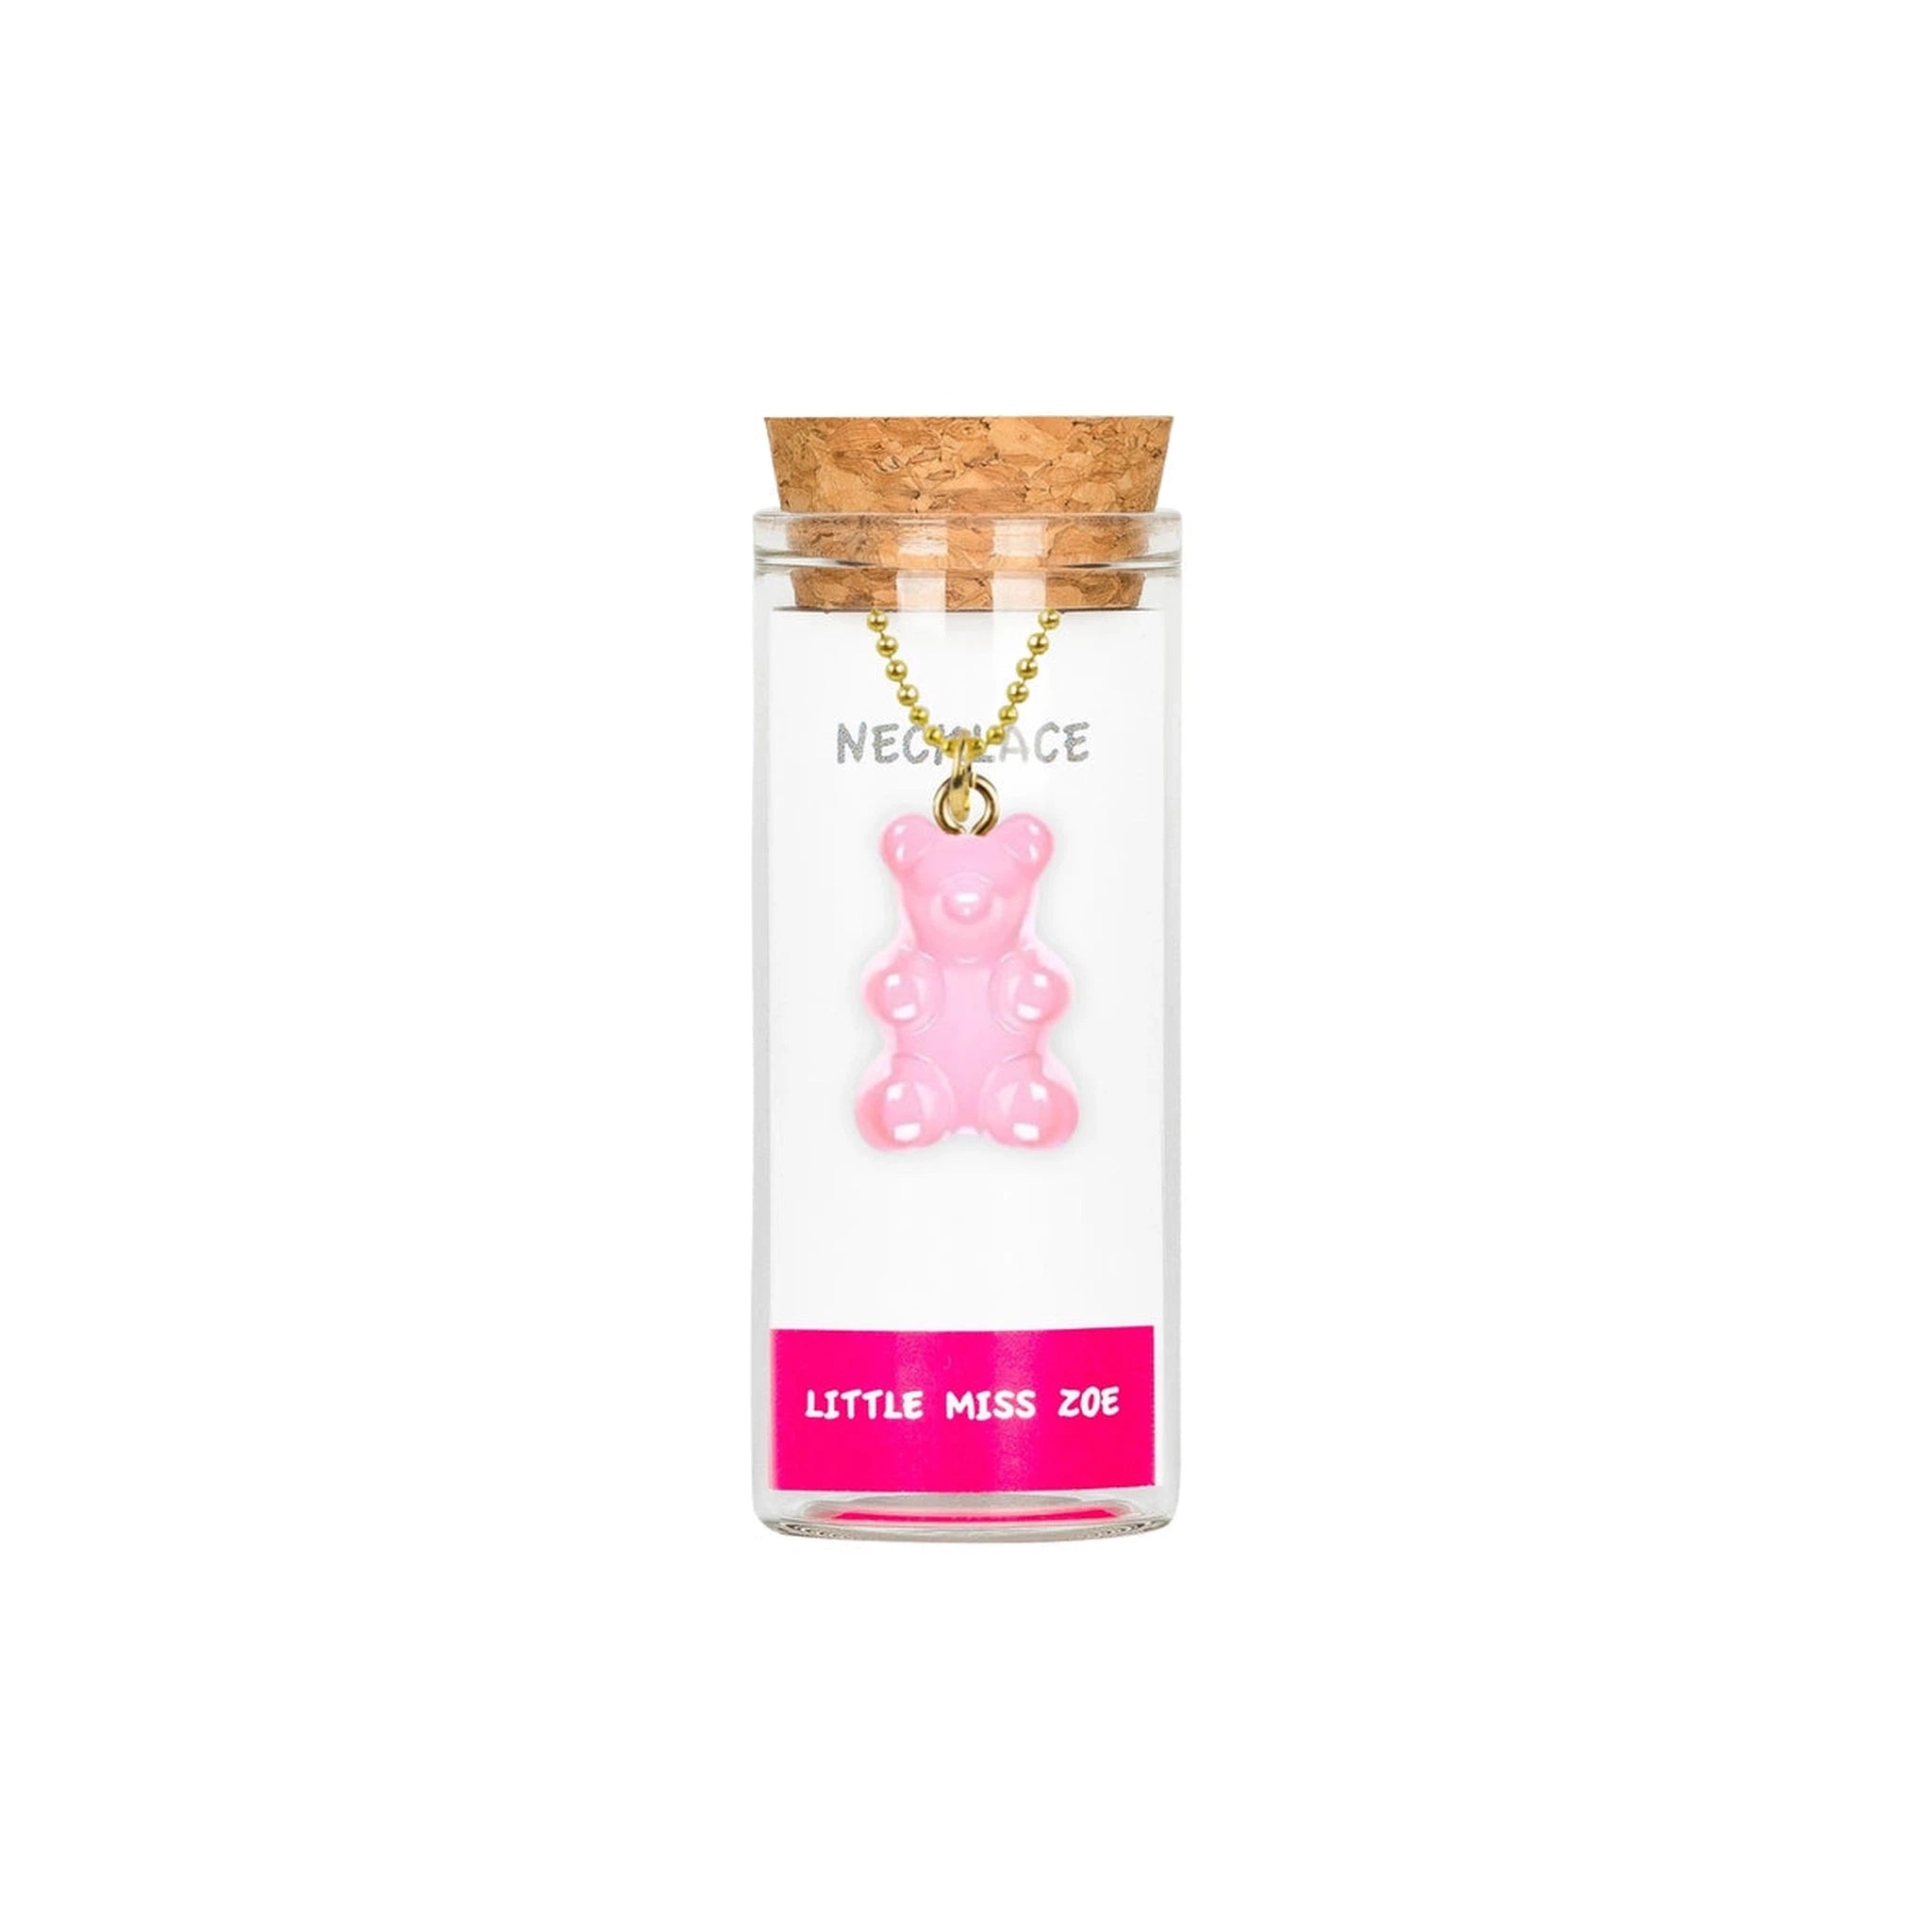 Gummy Bear Necklace in a Bottle - Several Colors